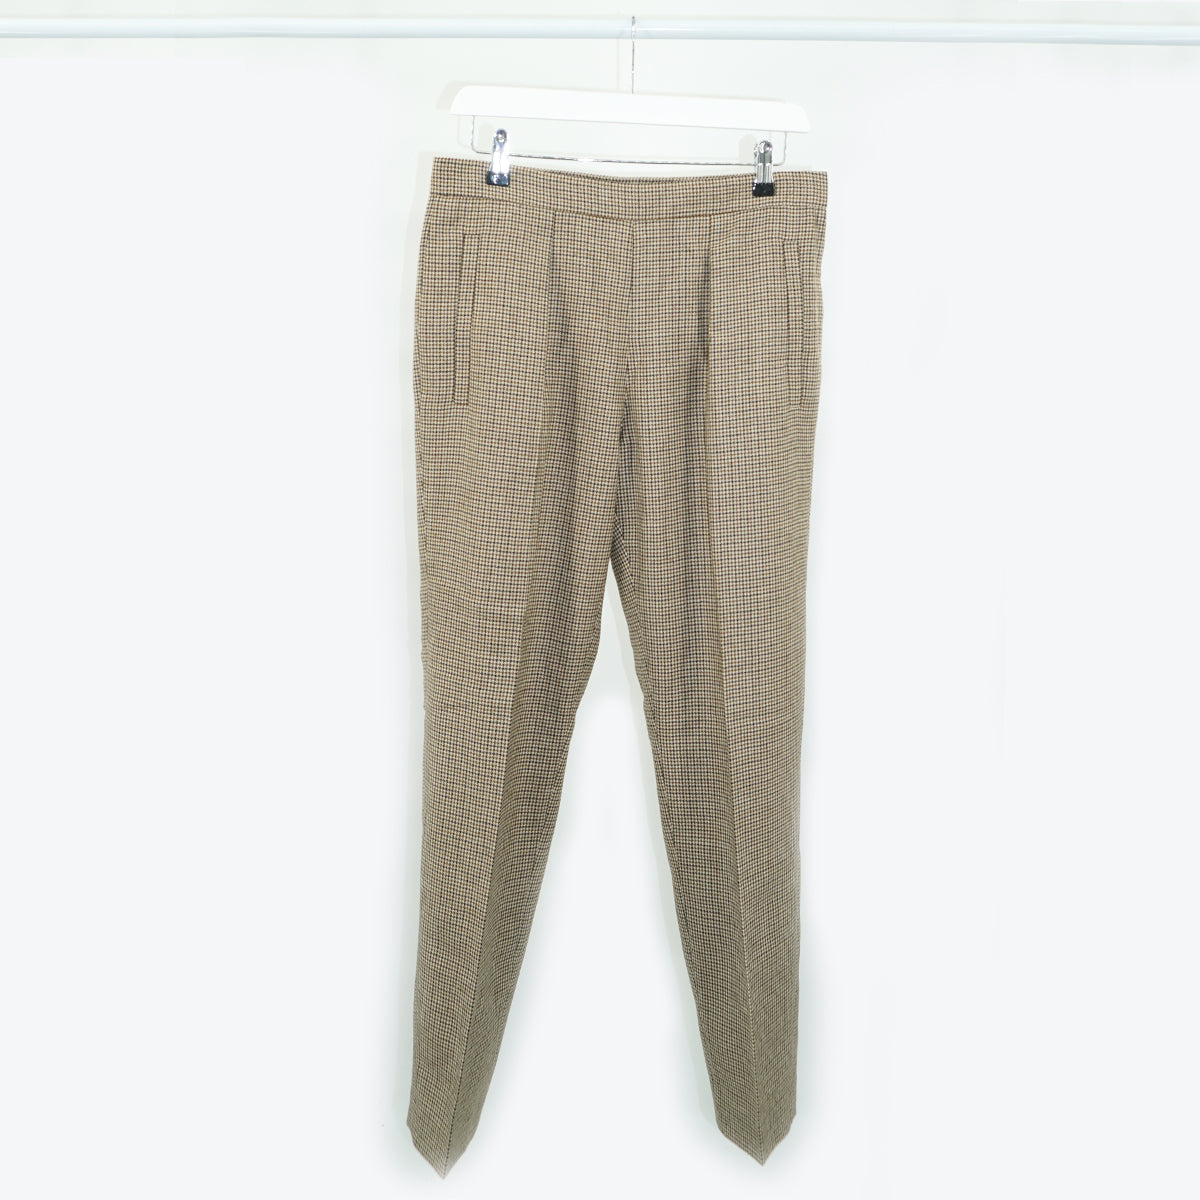 A.P.C. Natural Helen Trousers in Beige UK 10